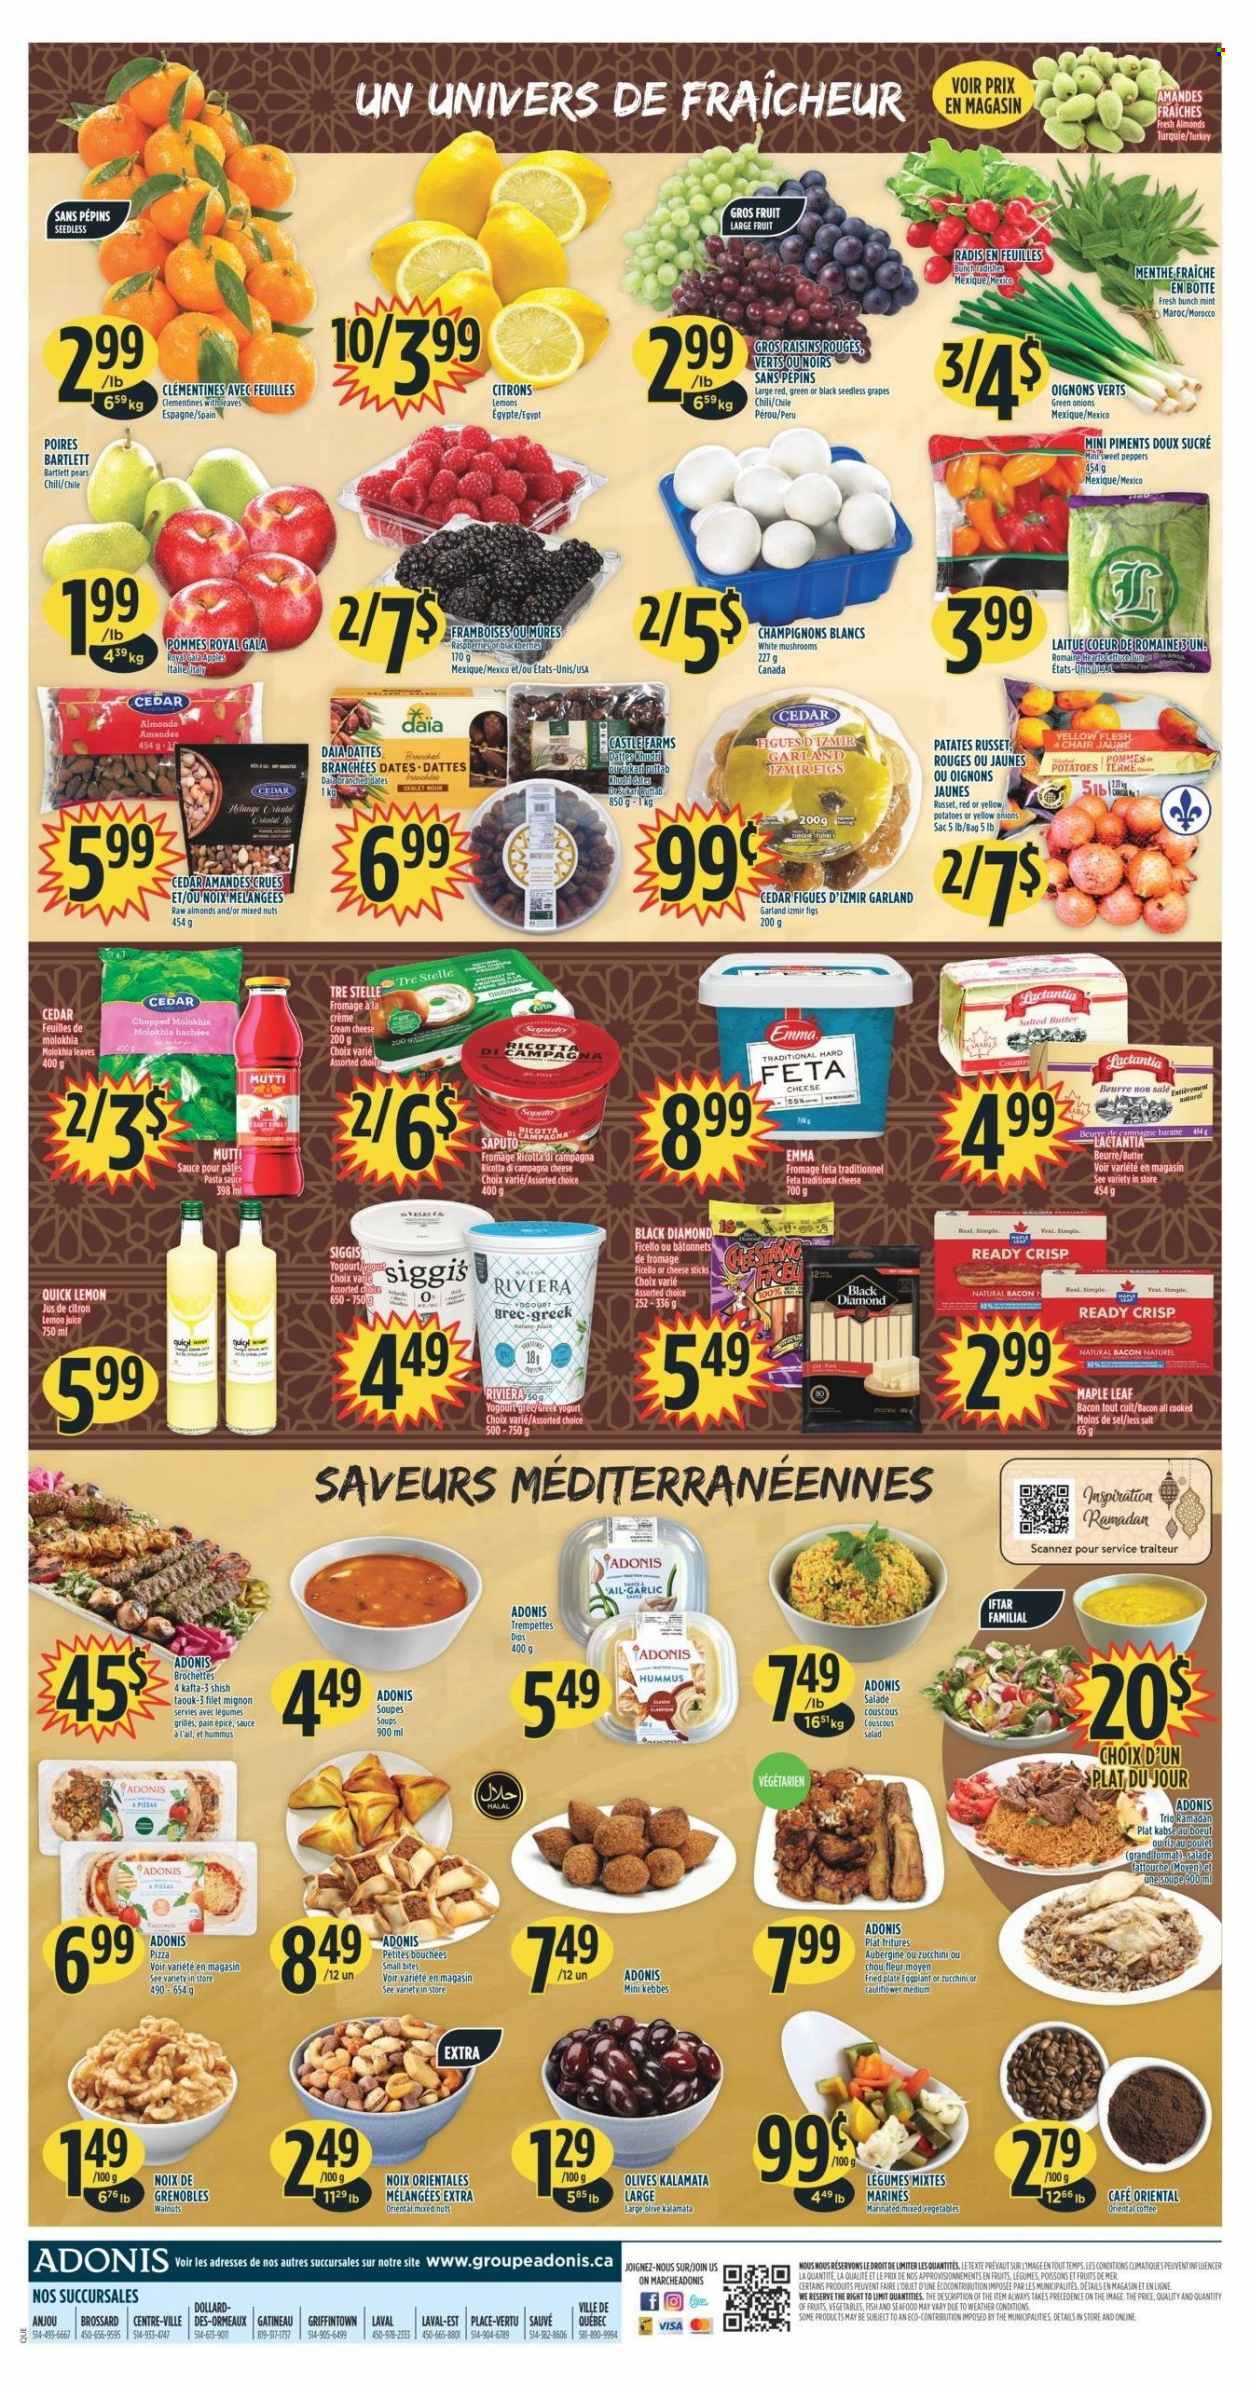 thumbnail - Adonis Flyer - March 23, 2023 - March 29, 2023 - Sales products - mushrooms, garlic, russet potatoes, zucchini, potatoes, salad, peppers, eggplant, green onion, Bartlett pears, clementines, figs, Gala, grapes, seedless grapes, pears, lemons, seafood, pizza, pasta, bacon, hummus, cream cheese, feta, yoghurt, butter, salted butter, mixed vegetables, cheese sticks, almonds, walnuts, dried fruit, mixed nuts, juice, coffee, Castle, beef tenderloin, couscous, raisins, ricotta, olives. Page 2.